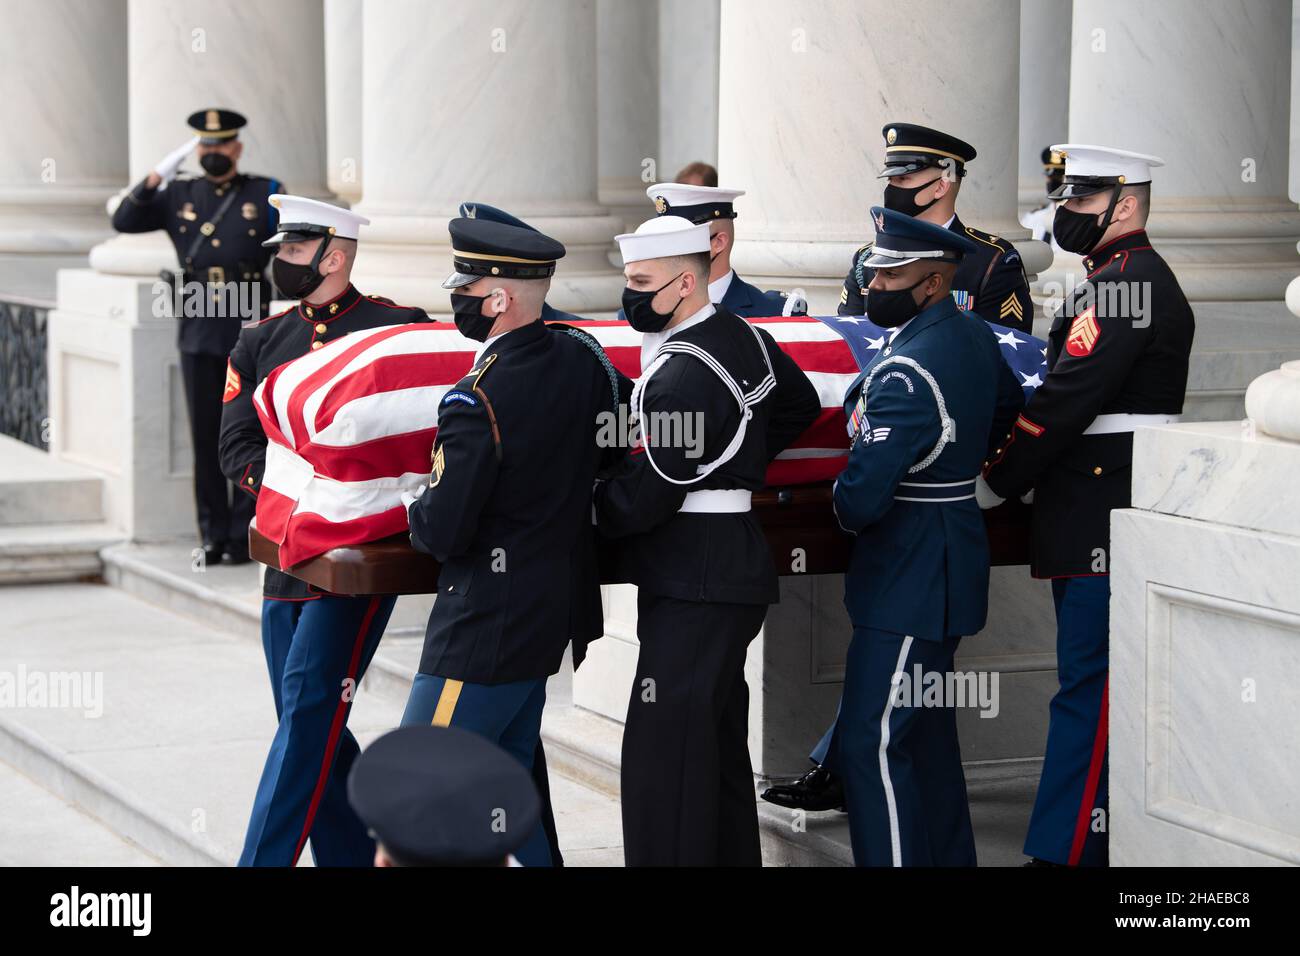 Washington, United States Of America. 10th Dec, 2021. Washington, United States of America. 10 December, 2021. U.S. Armed Forces honor guard carry the flag-draped casket of World War II veteran and former Senator Robert Dole down the steps of the U.S. Capitol, December 10, 2021 in Washington, DC Senator Dole died at age 98 following a lifetime of service to the nation. Credit: Sgt. Kevin Roy/U.S. Army/Alamy Live News Stock Photo